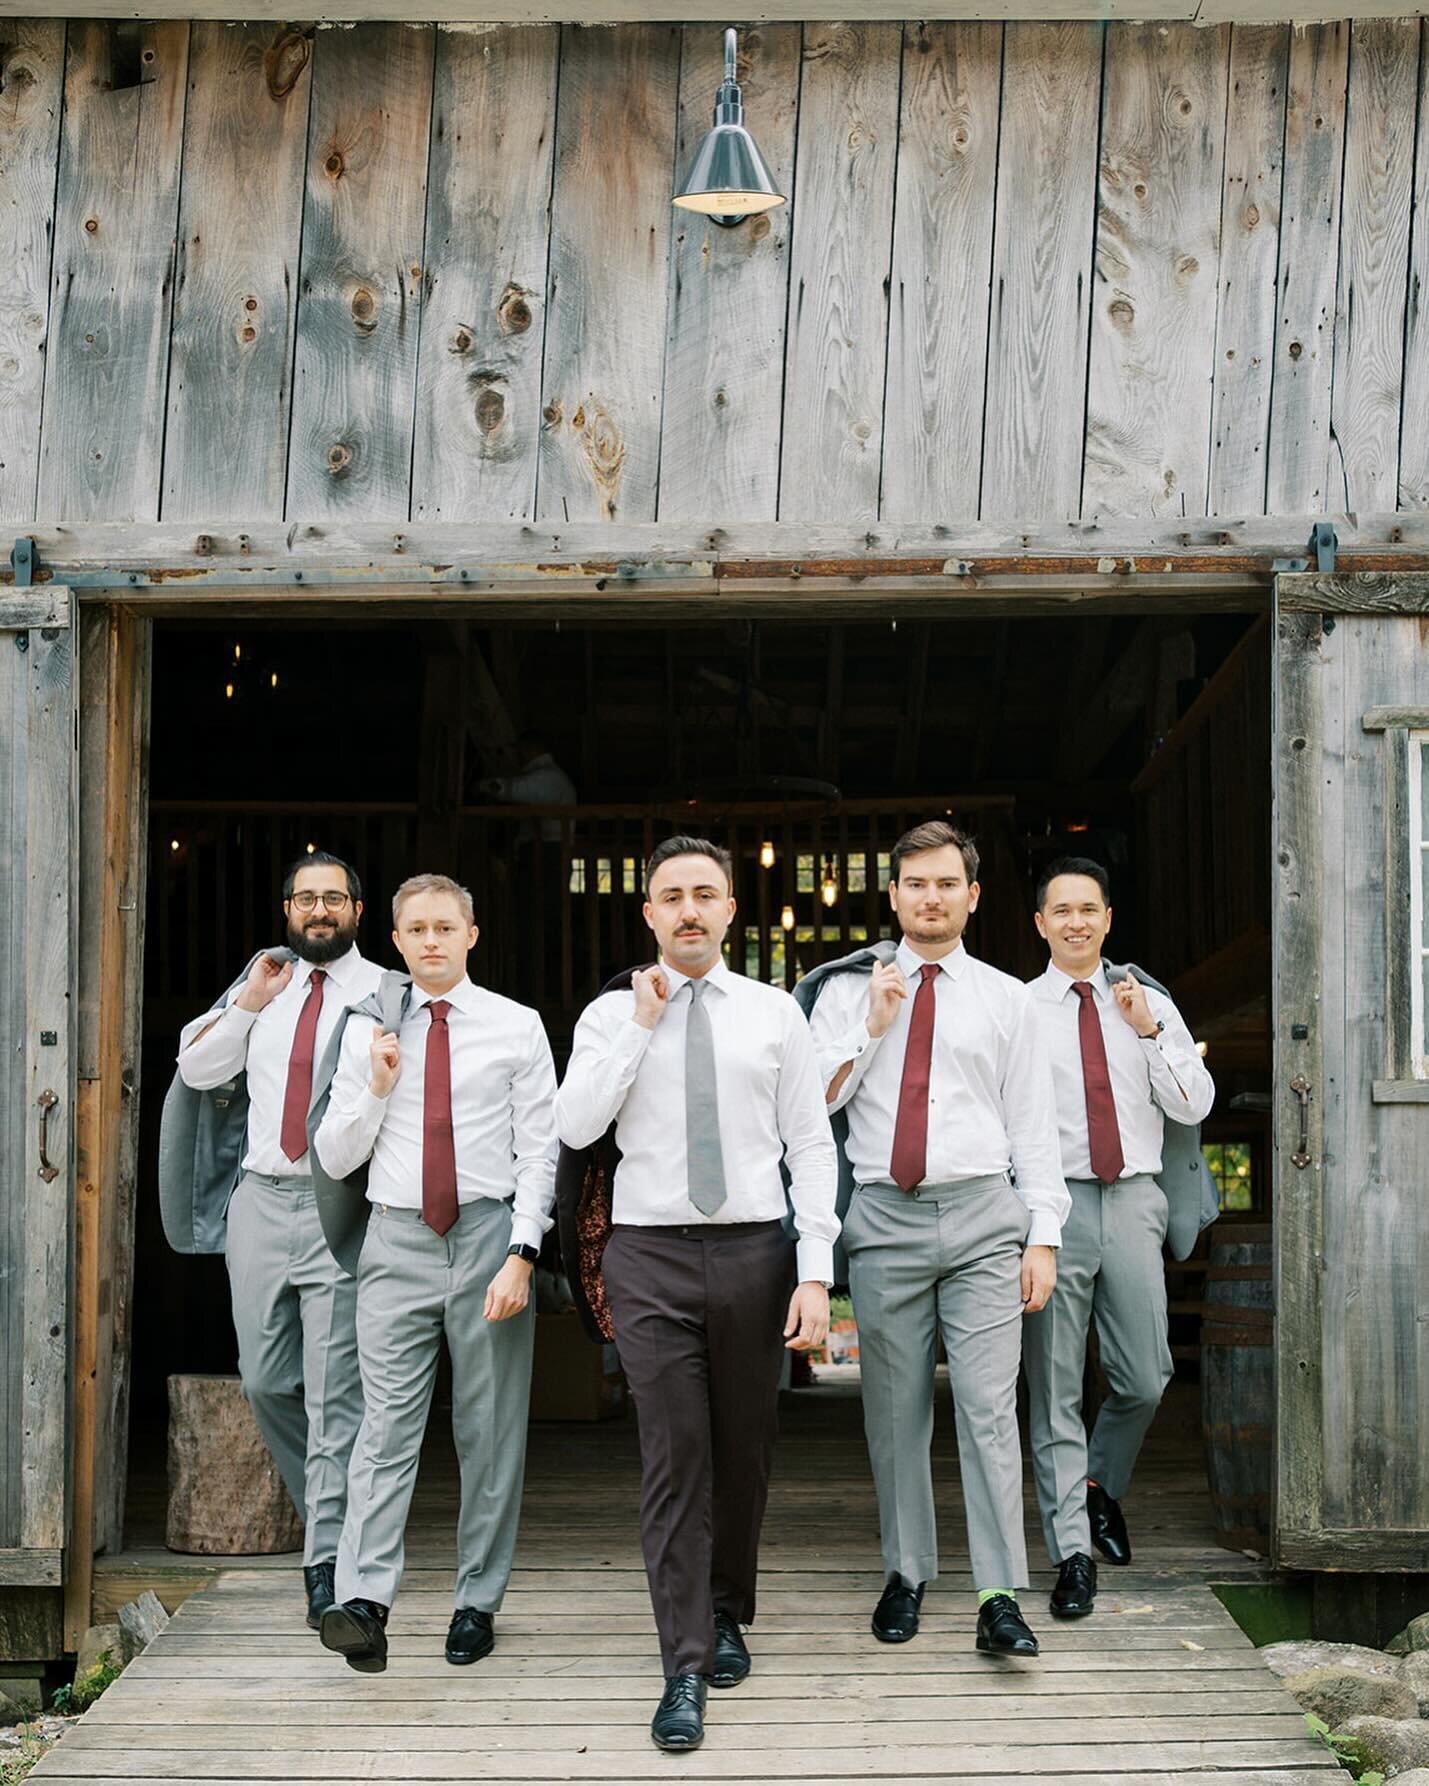 When the boys hit the scene like woah! The brides tend to get a lot of the attention at weddings. But when the guys come out of the barn dressed to the nines, everyone takes notice.
&bull;
📸 @theleightonco